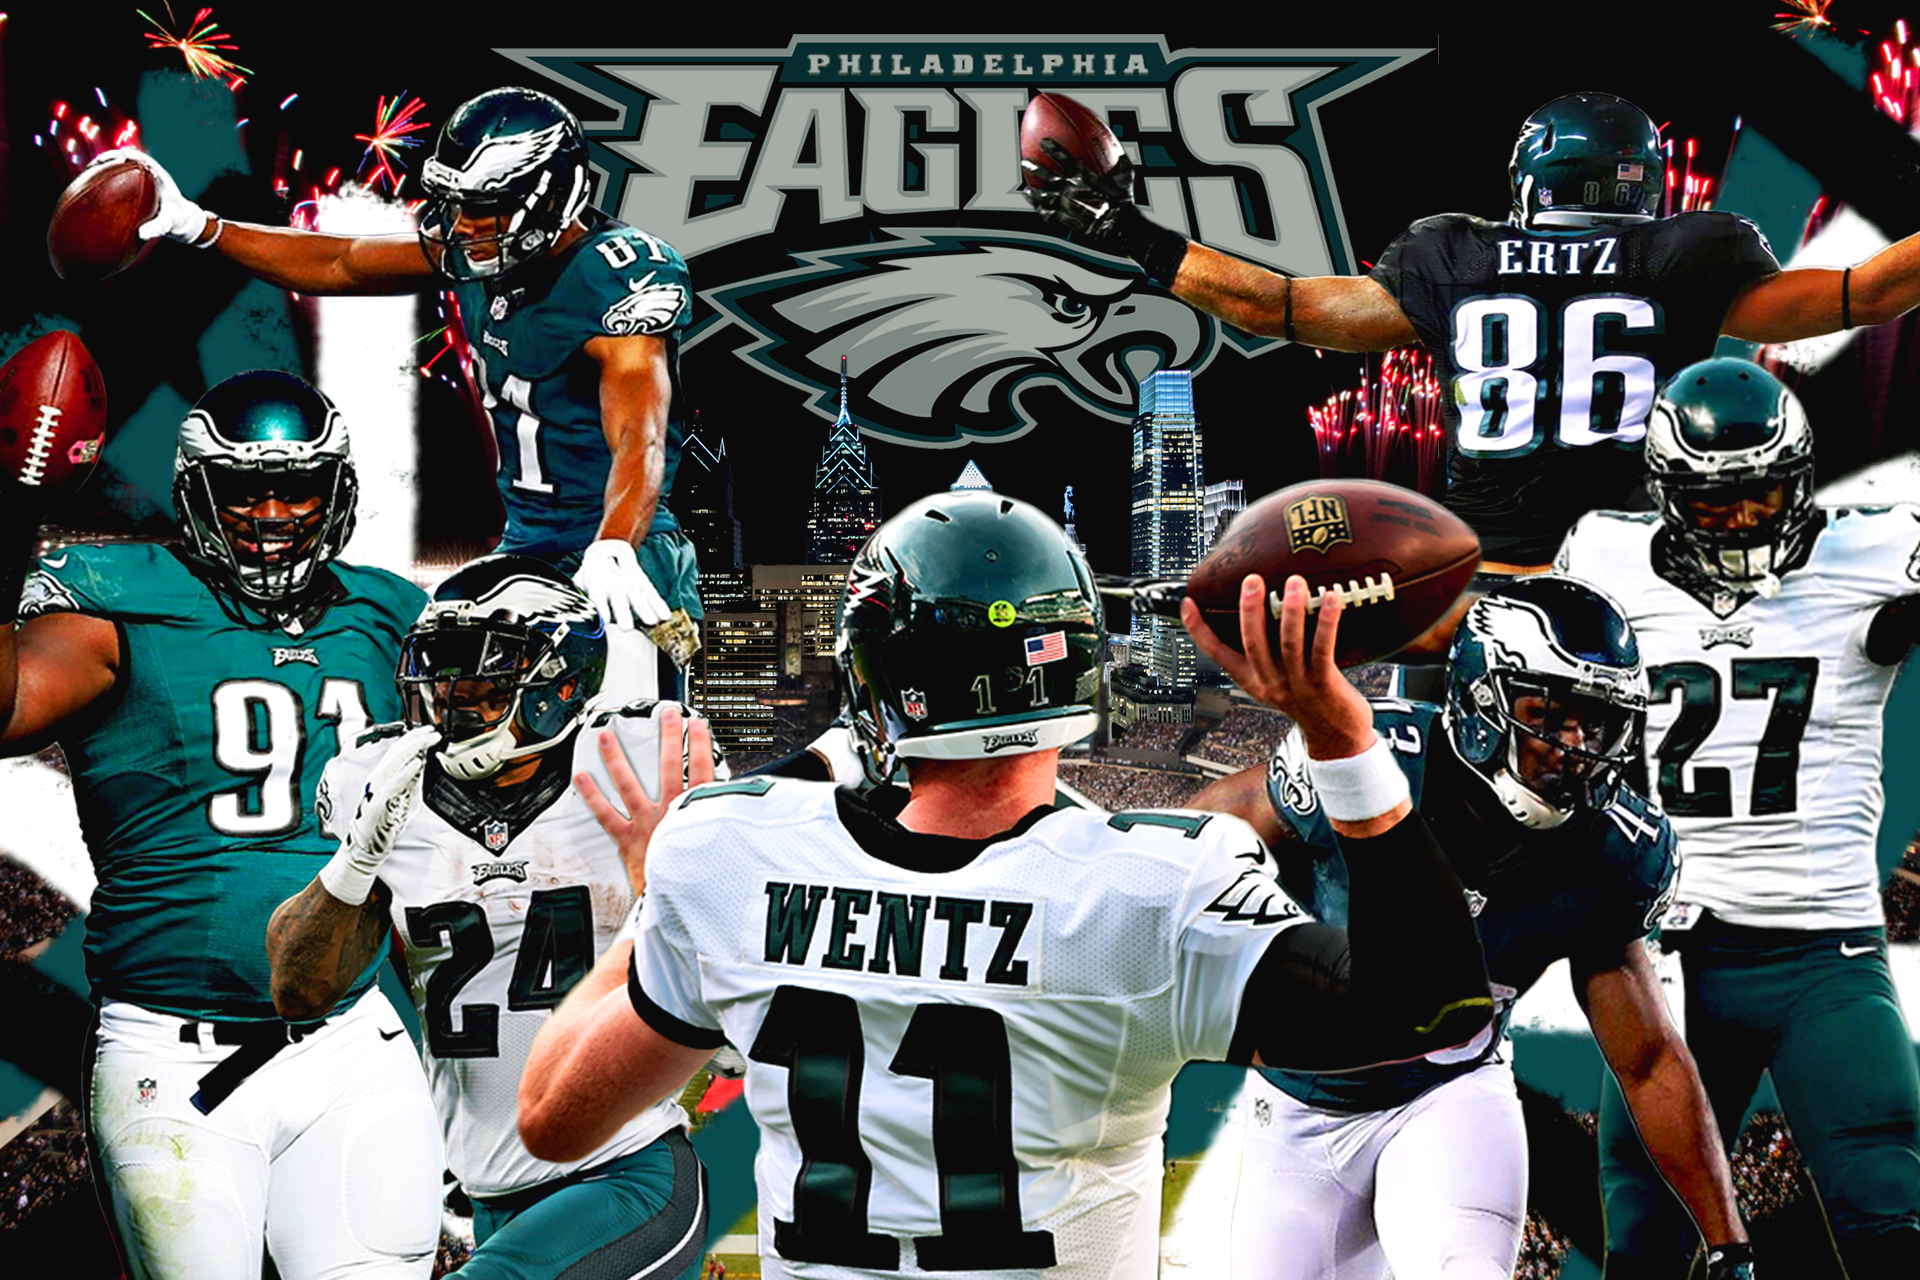 1920x1280 If one person uses my wallpaper, I'll be happy. Fly Eagles Fly. : r/eagles